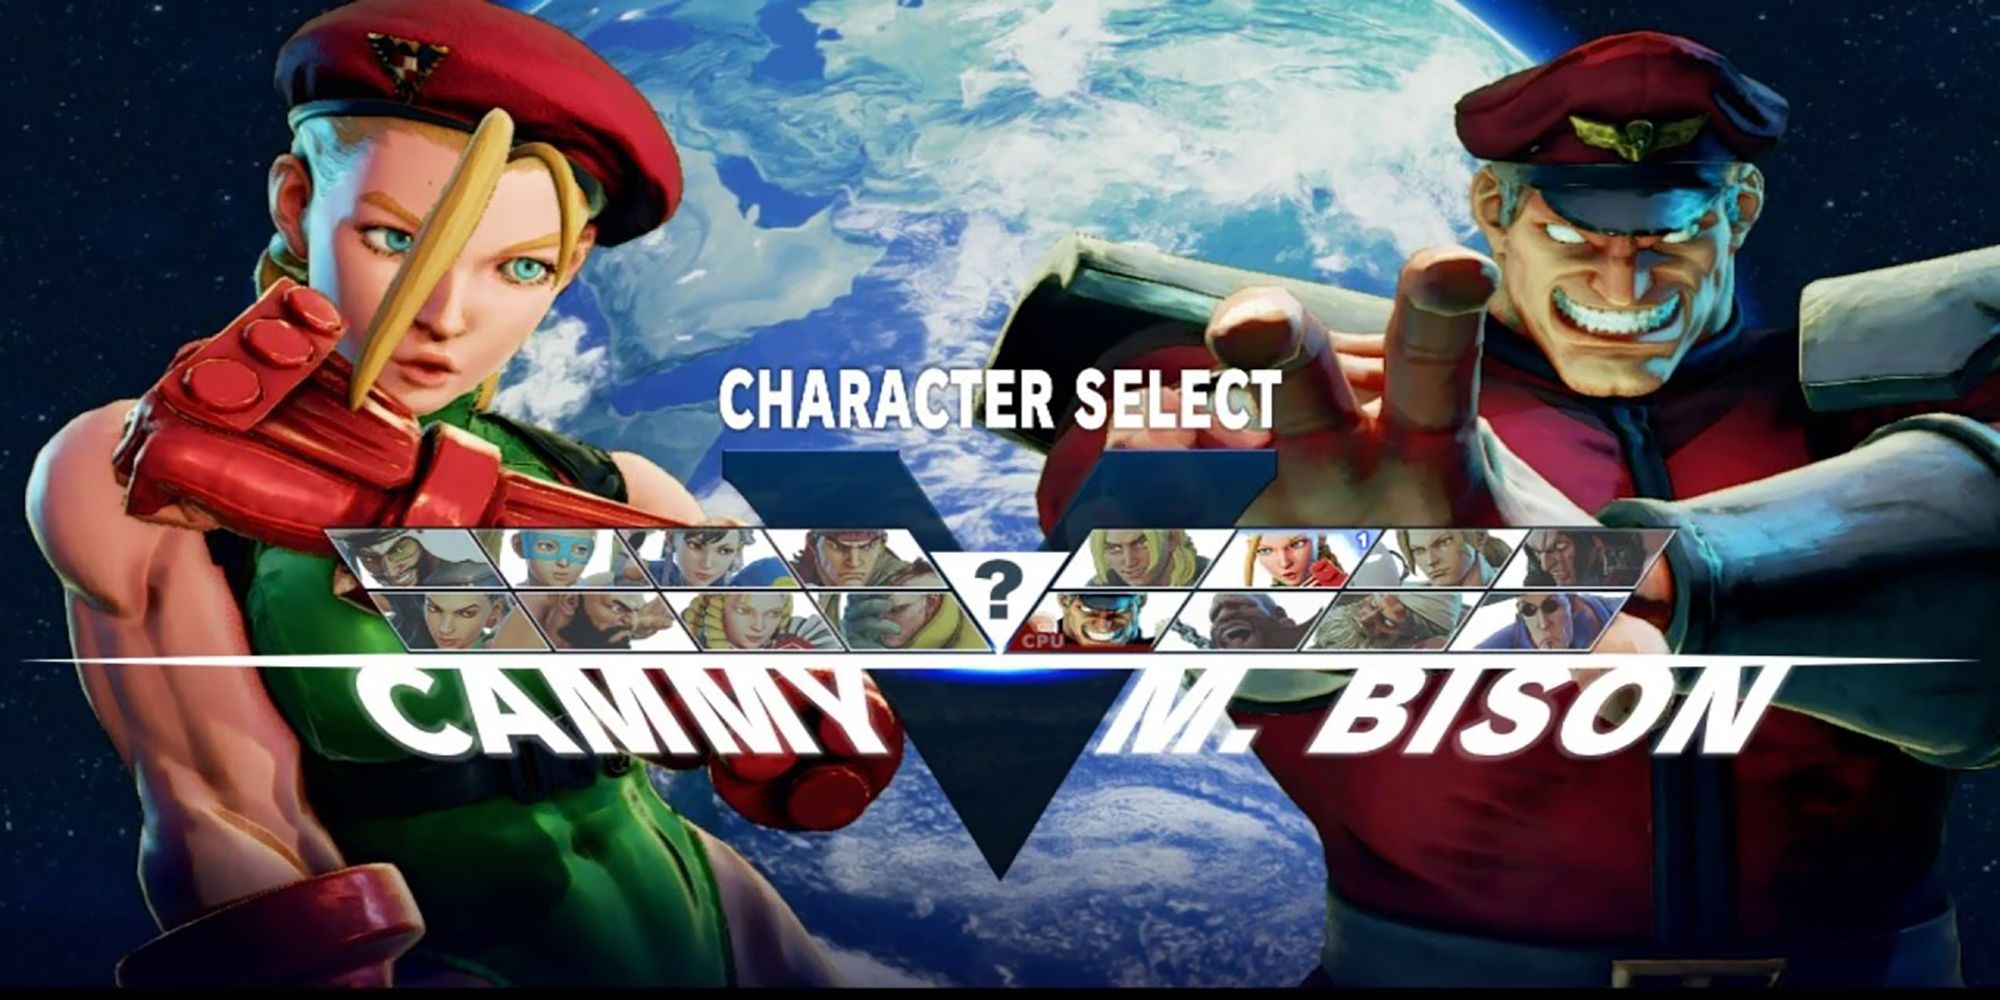 The Original Character Select screen, featuring the global space-view backdrop, from Street Fighter 5.